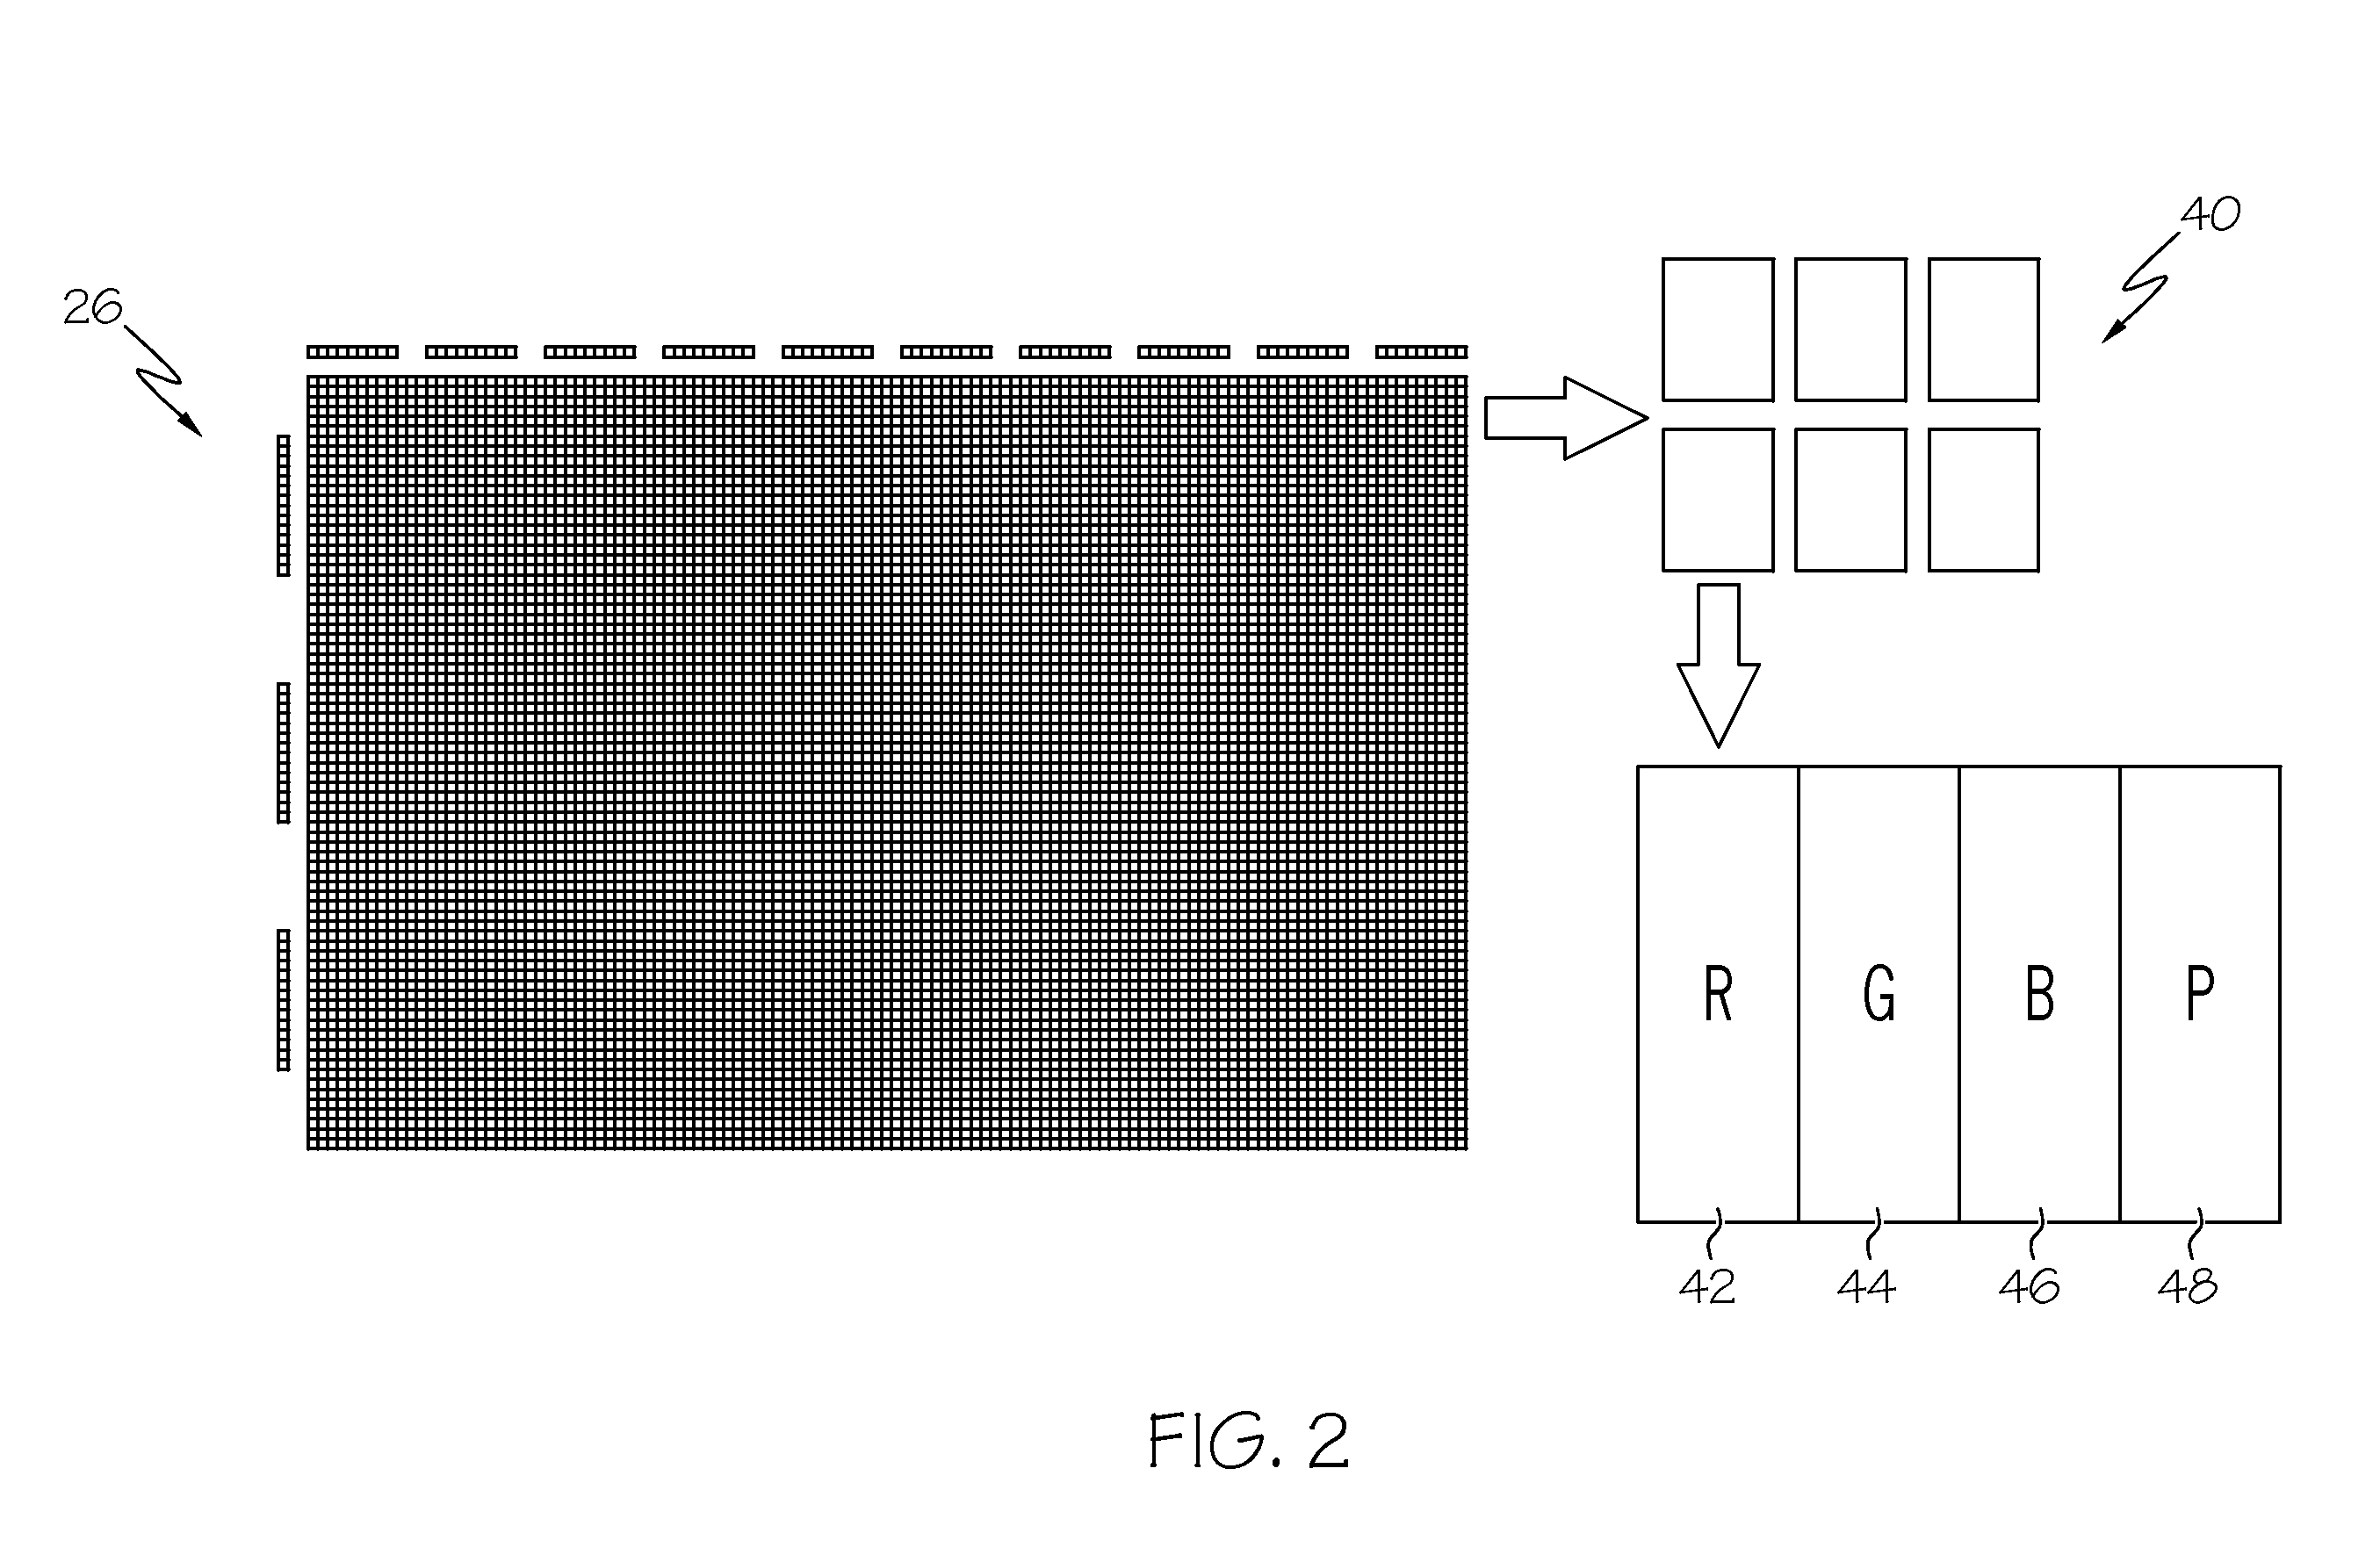 Glare detection and mitigation method for a photo-sensitive display device